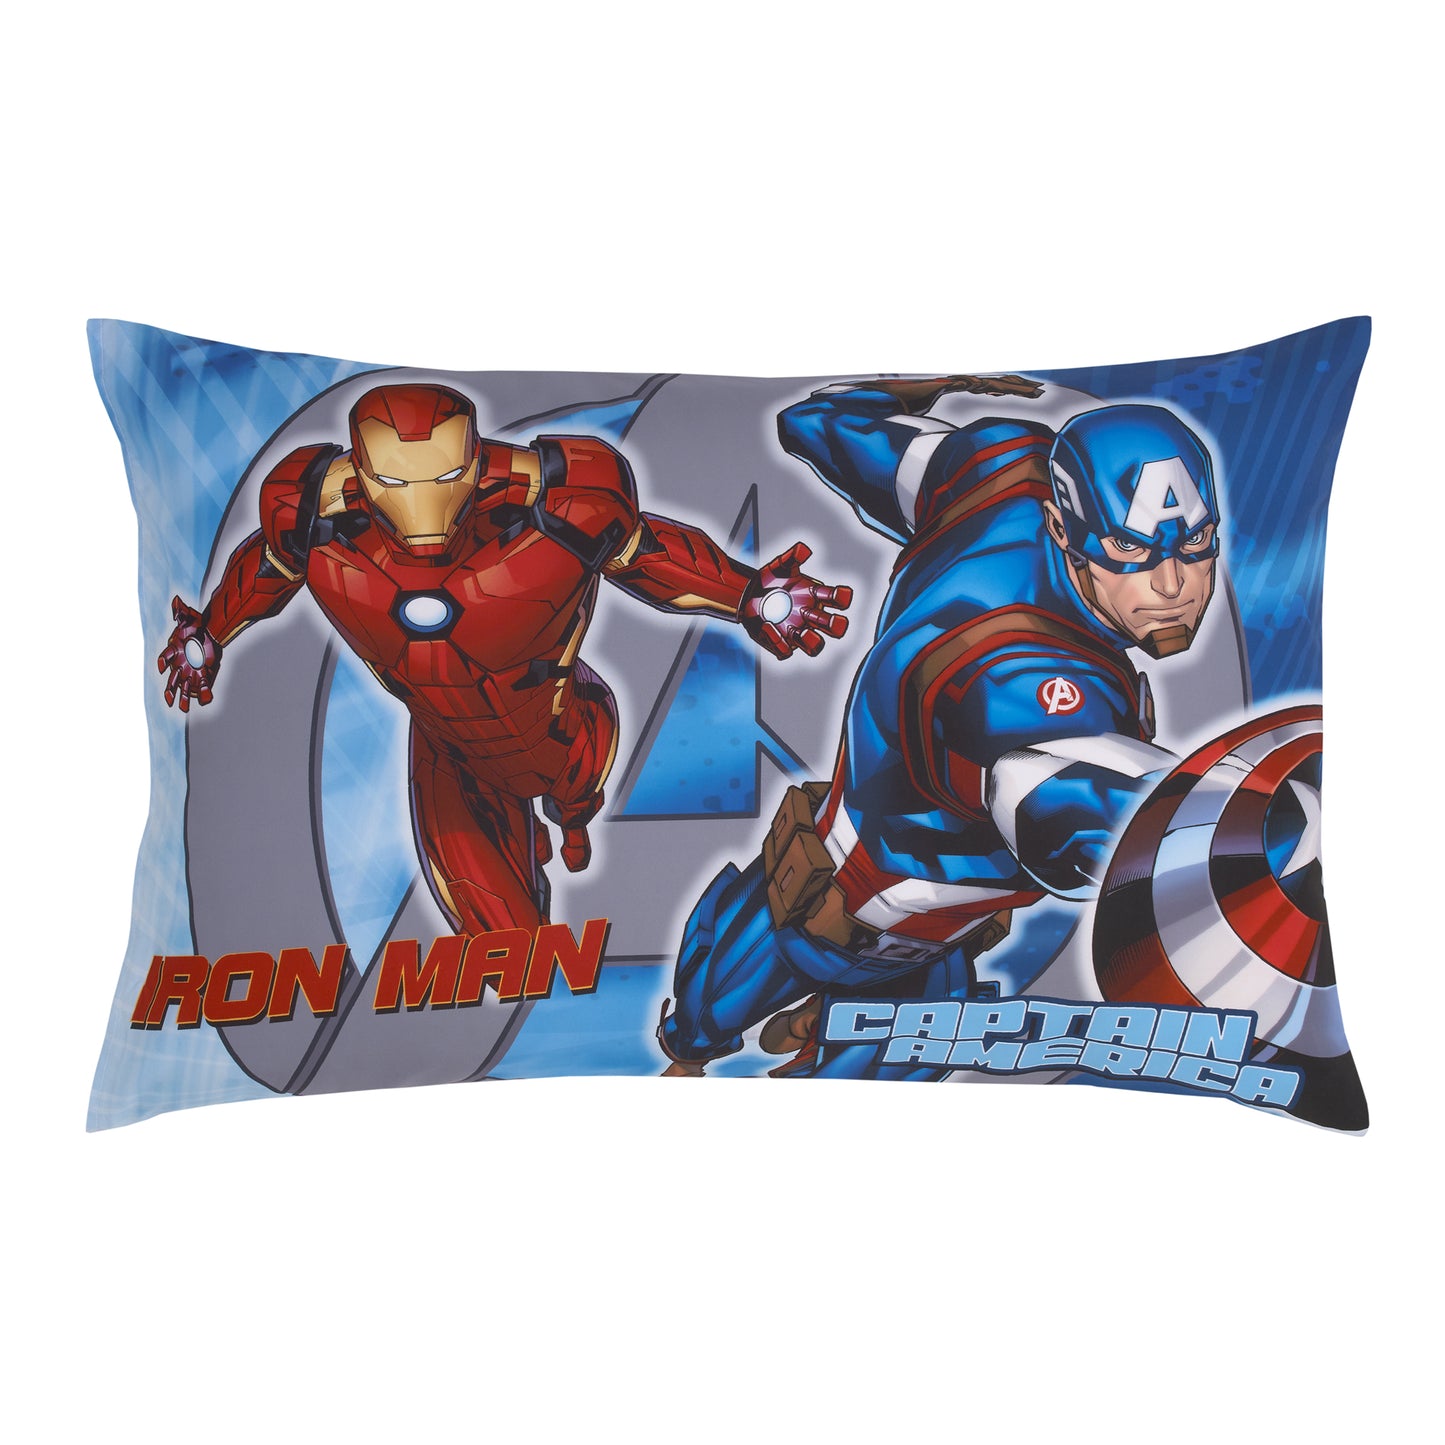 Marvel The Avengers I Am A Hero Blue, Green, Red, and Yellow 4 Piece Toddler Bed Set - Comforter, Fitted Bottom Sheet, Flat Top Sheet, and Reversible Pillowcase